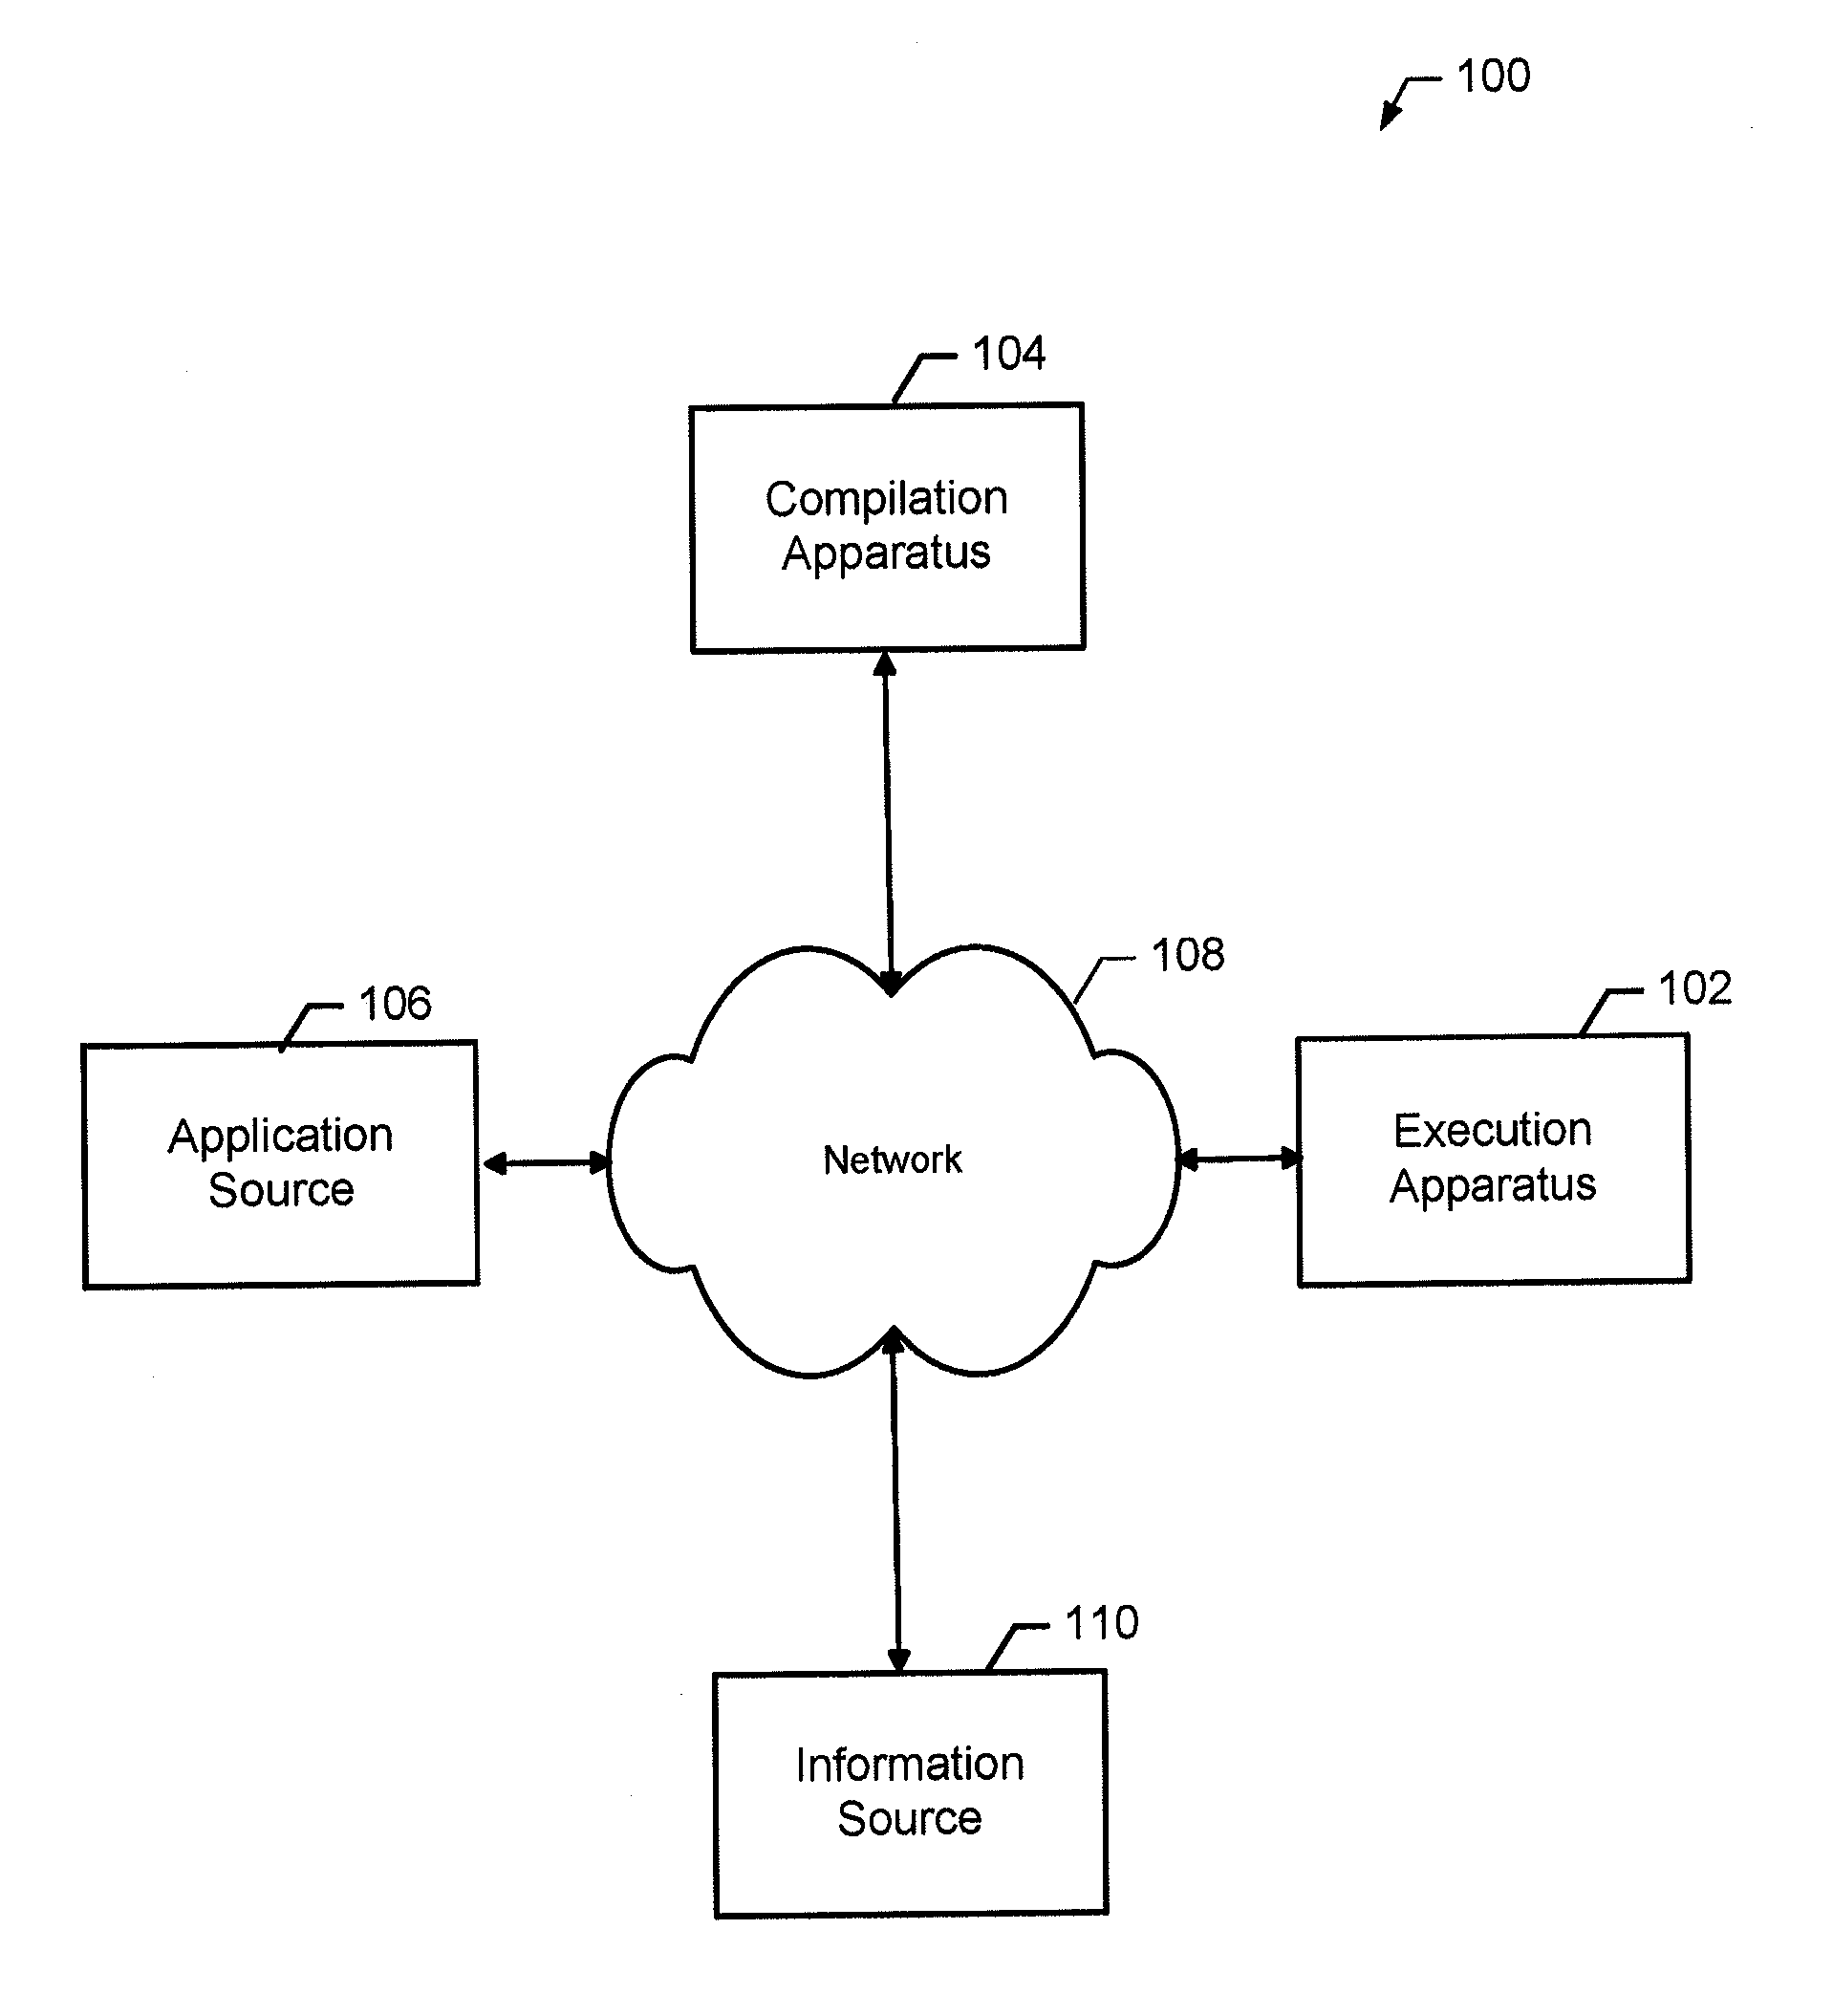 Methods and apparatuses for facilitating execution of applications requiring runtime compilation